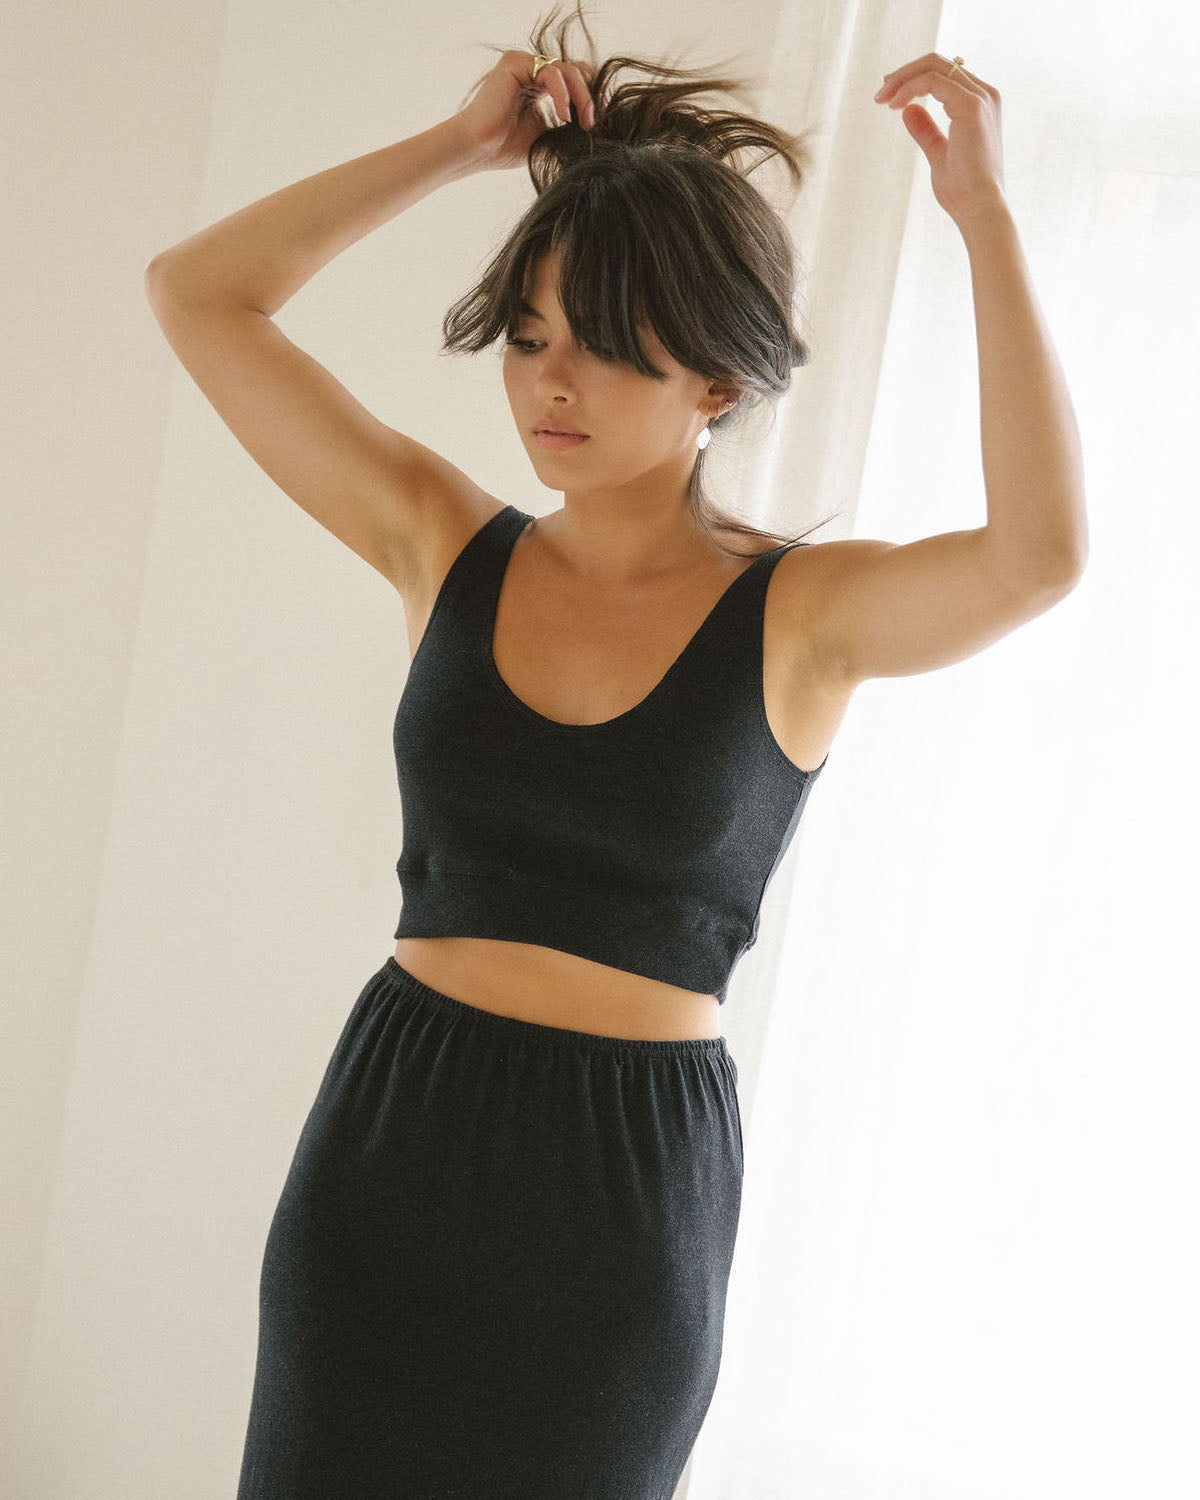 The closet staple top that is equally comfy as it is stylish. A cropped, form fitting mid-weight knit top that lays flat on the ribbed cage and is flattering on all kinds of body types. Handmade with 100% cotton in Vancouver, BC.